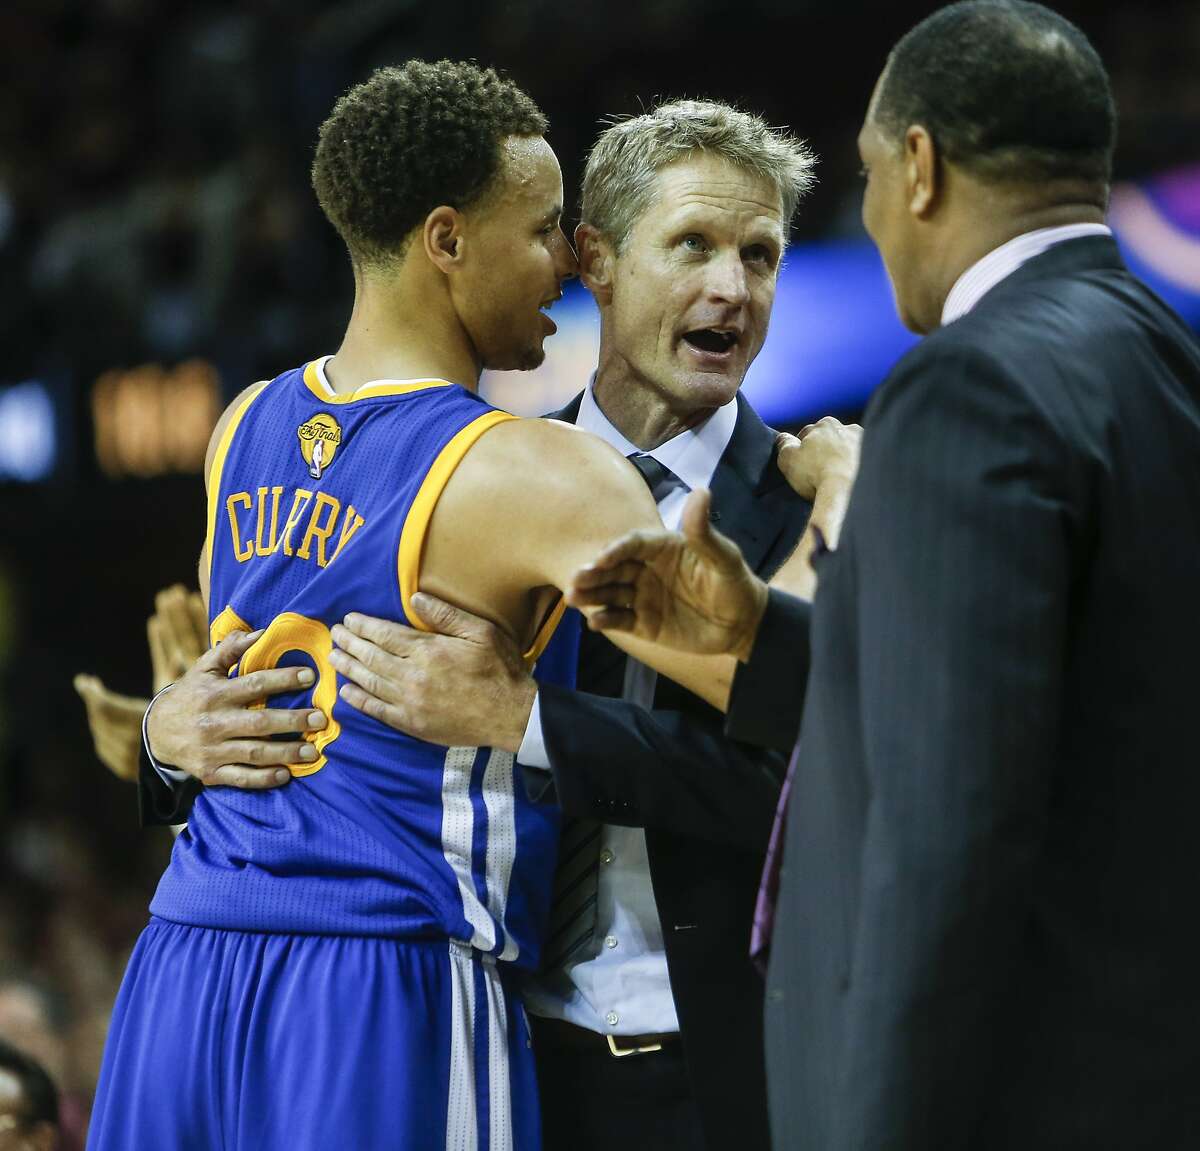 Steve Kerr: An unforgettable journey from NBA player to USA